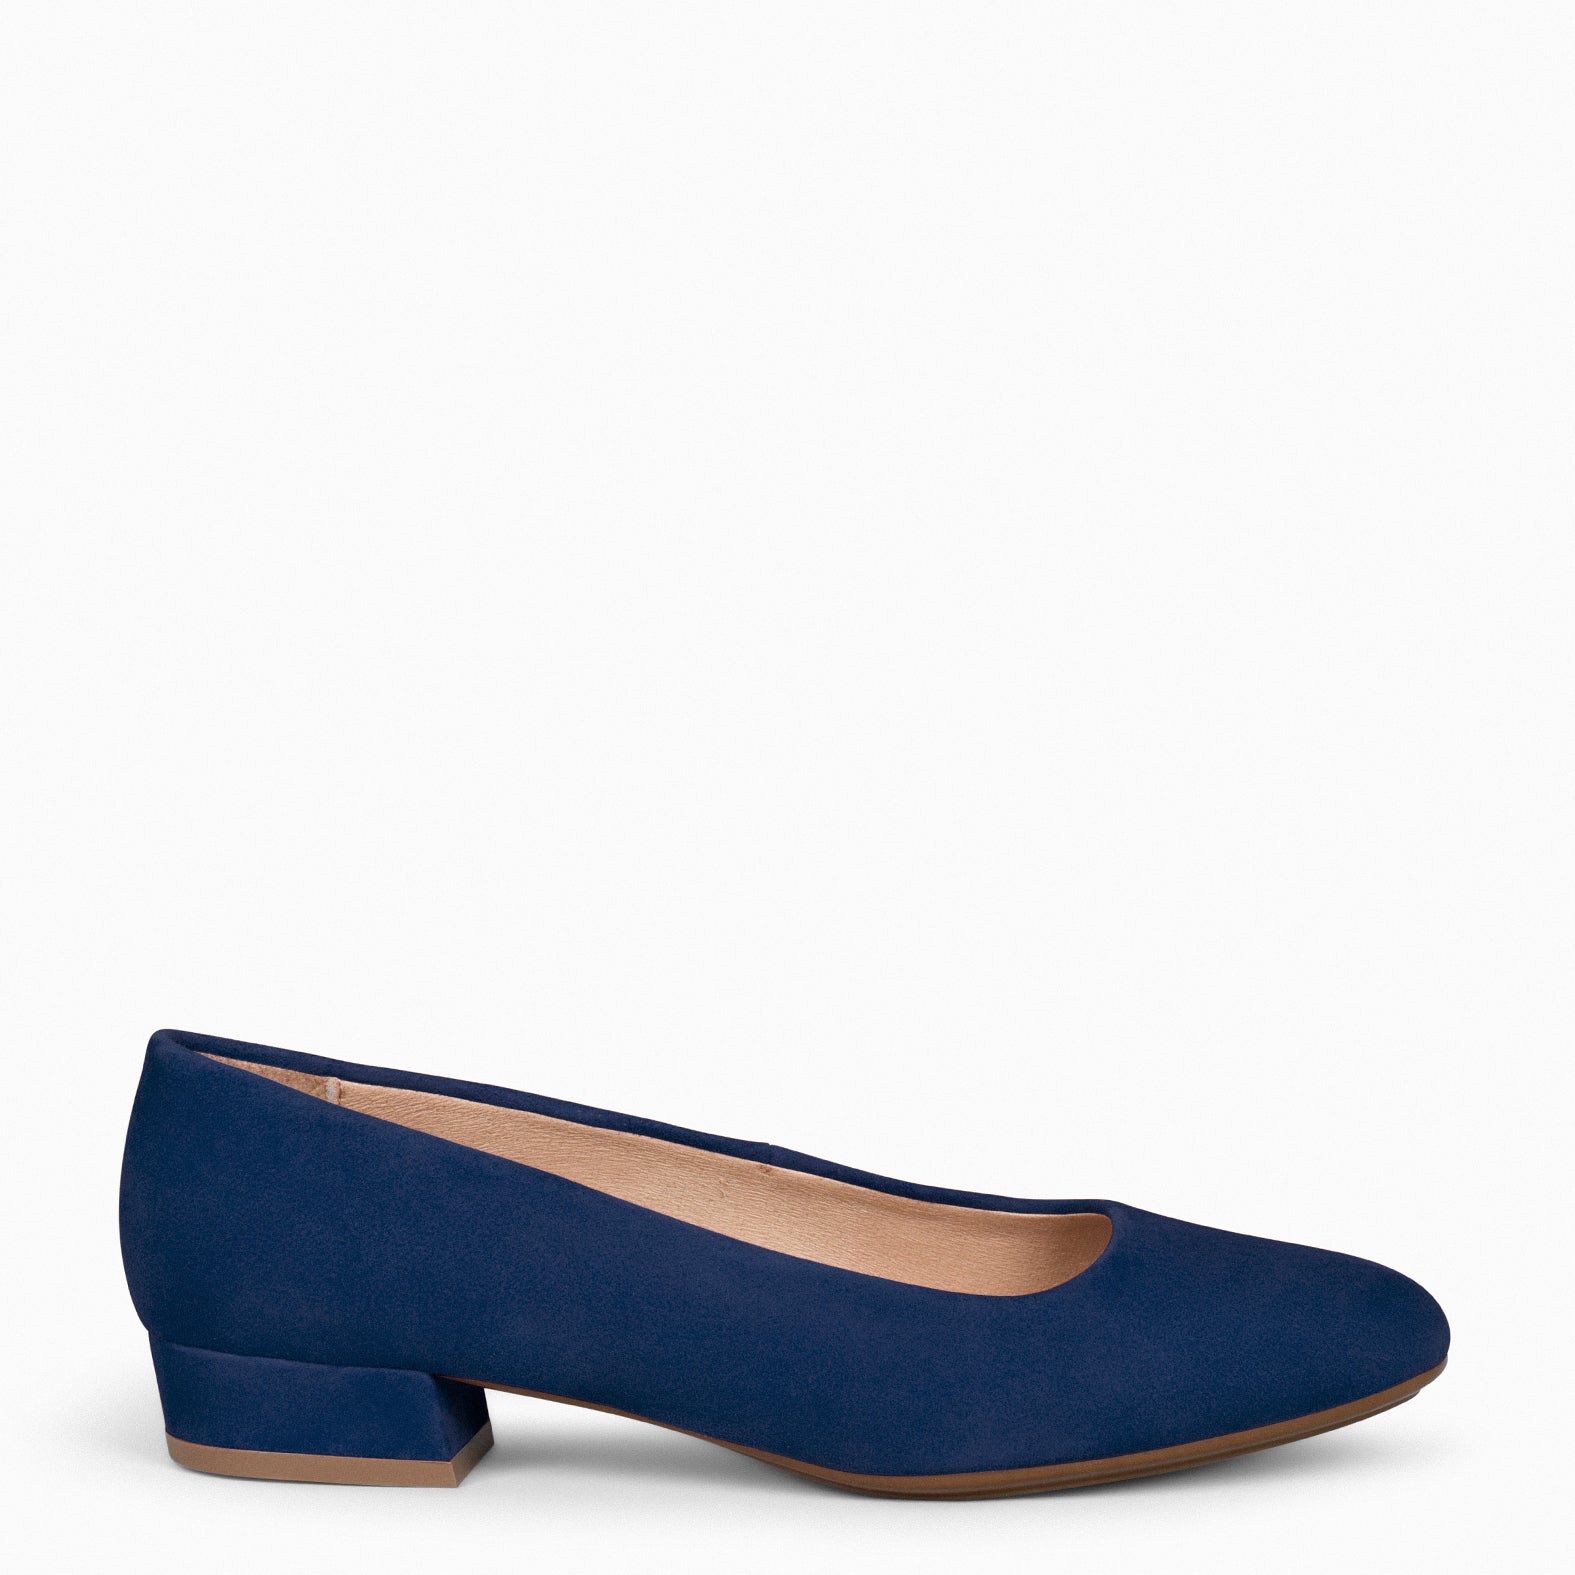 URBAN XS –  NAVY low-heeled suede shoes